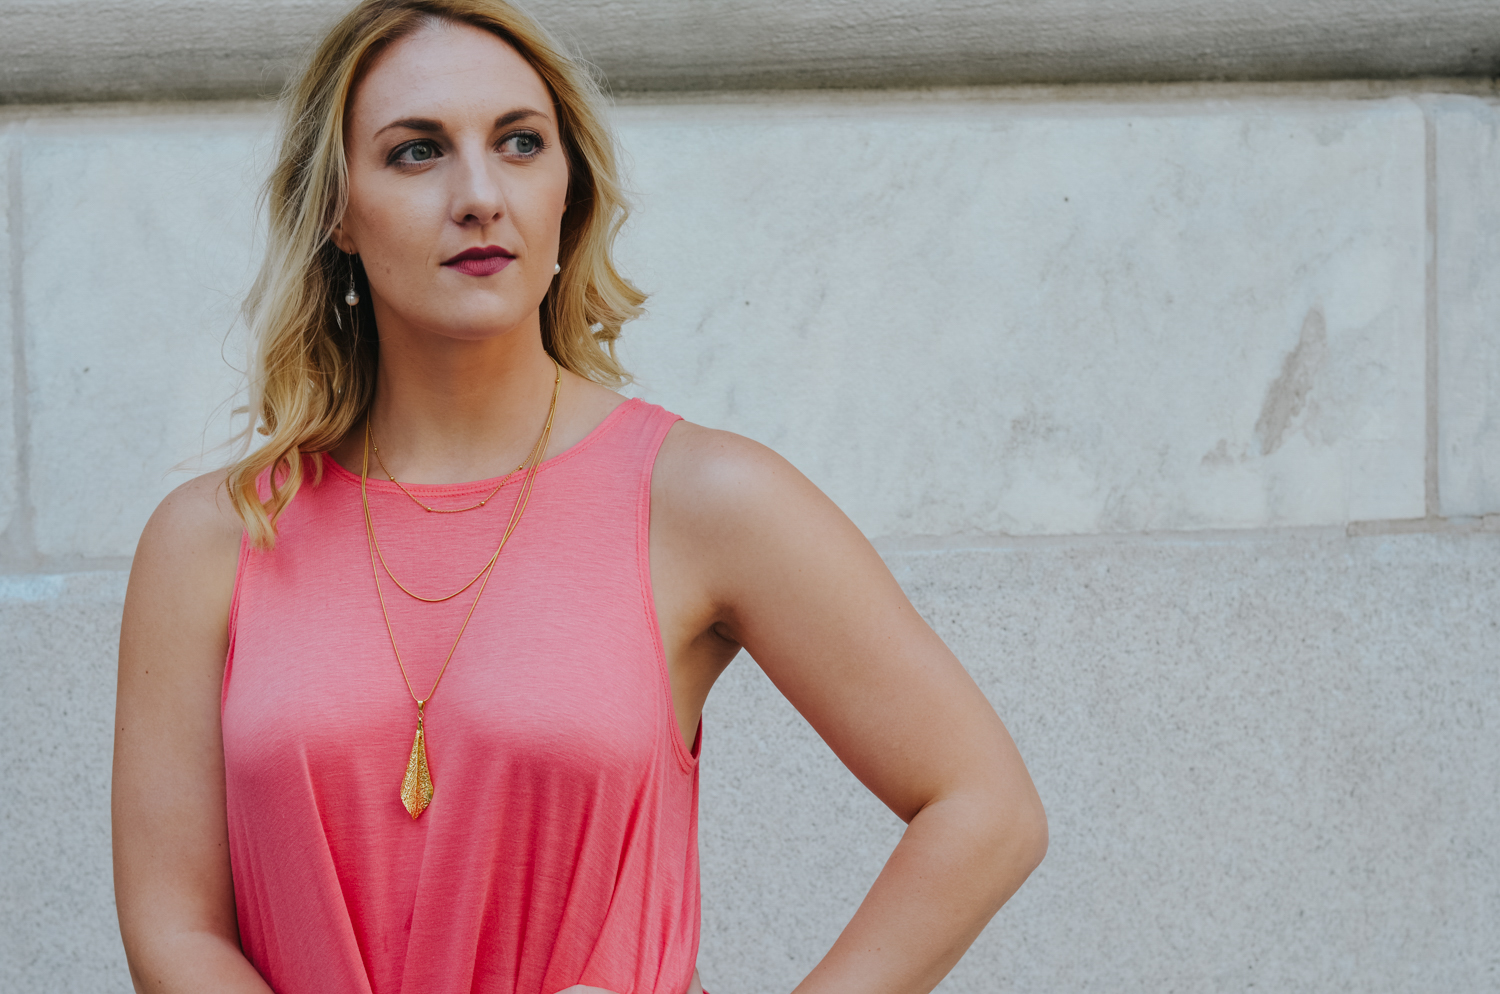 Glamorous, eco-friendly layered necklace from sustainable jewelry brand @simplynaturebiogoods